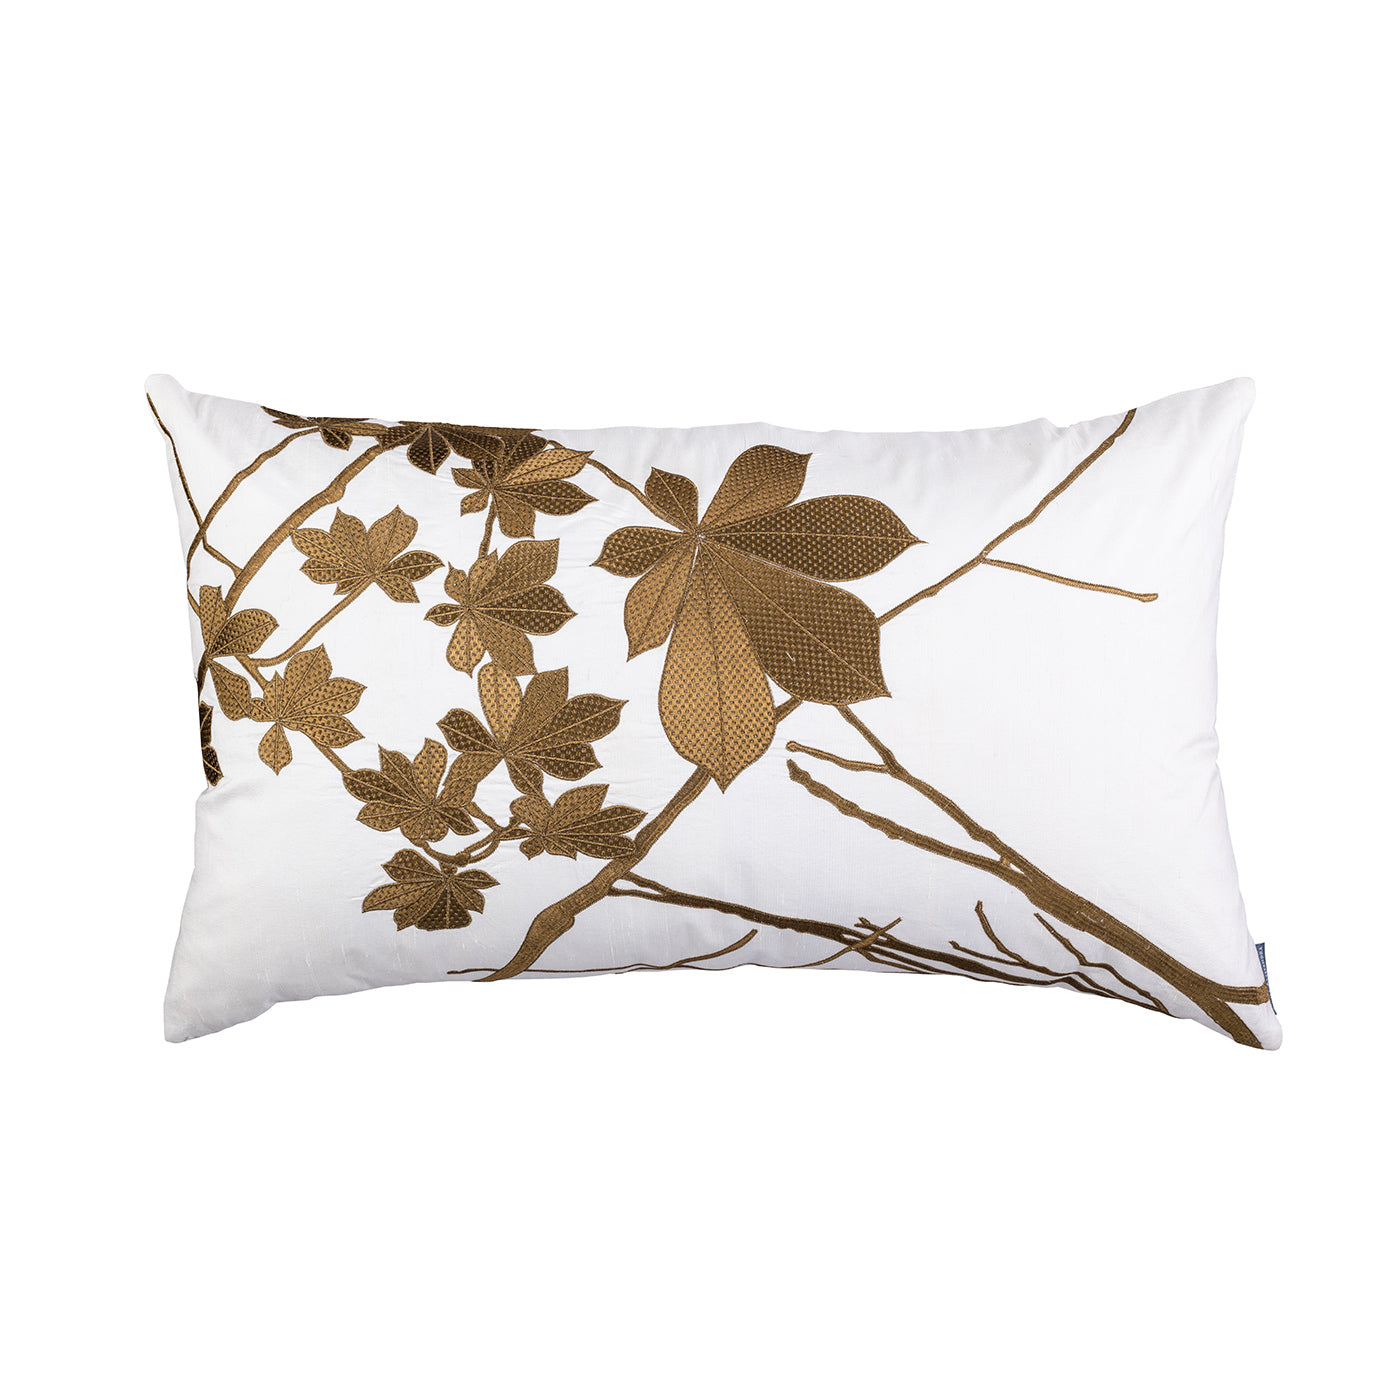 Leaf Lg. Rect. Ivory Silk With Antique Gold Machine Embroidery 18X30